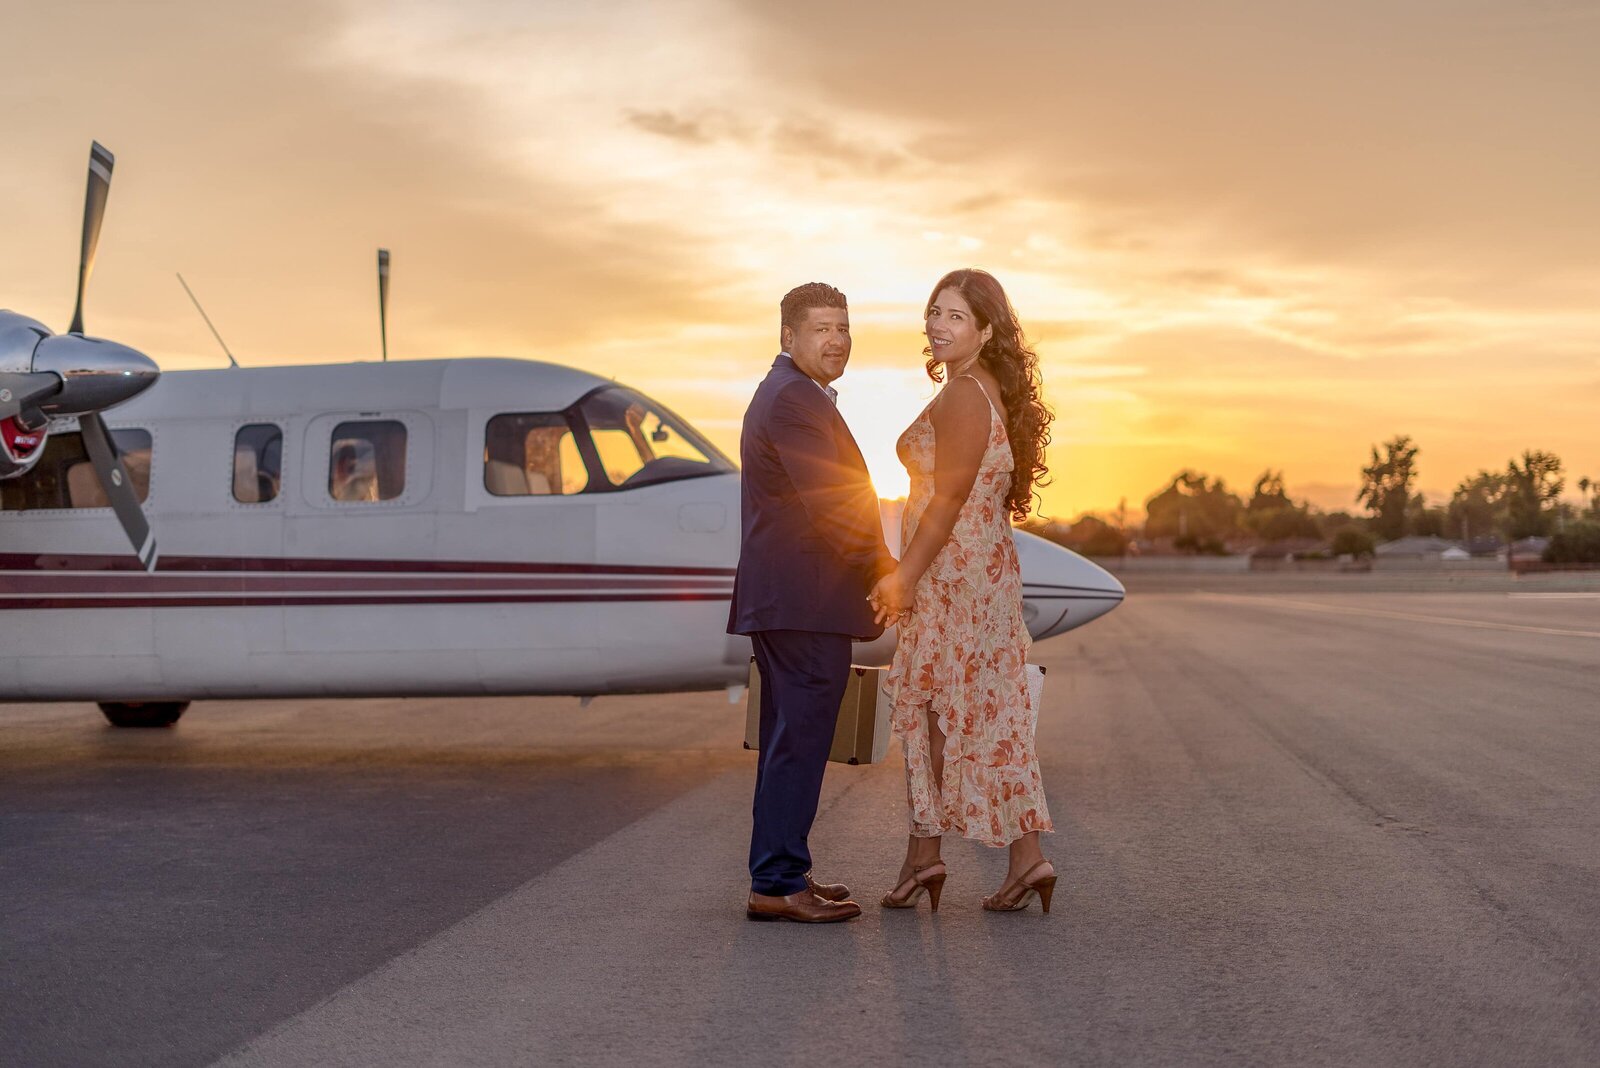 Hispanic couple holding suitcases looking back before walking around the front of plane with sun setting.